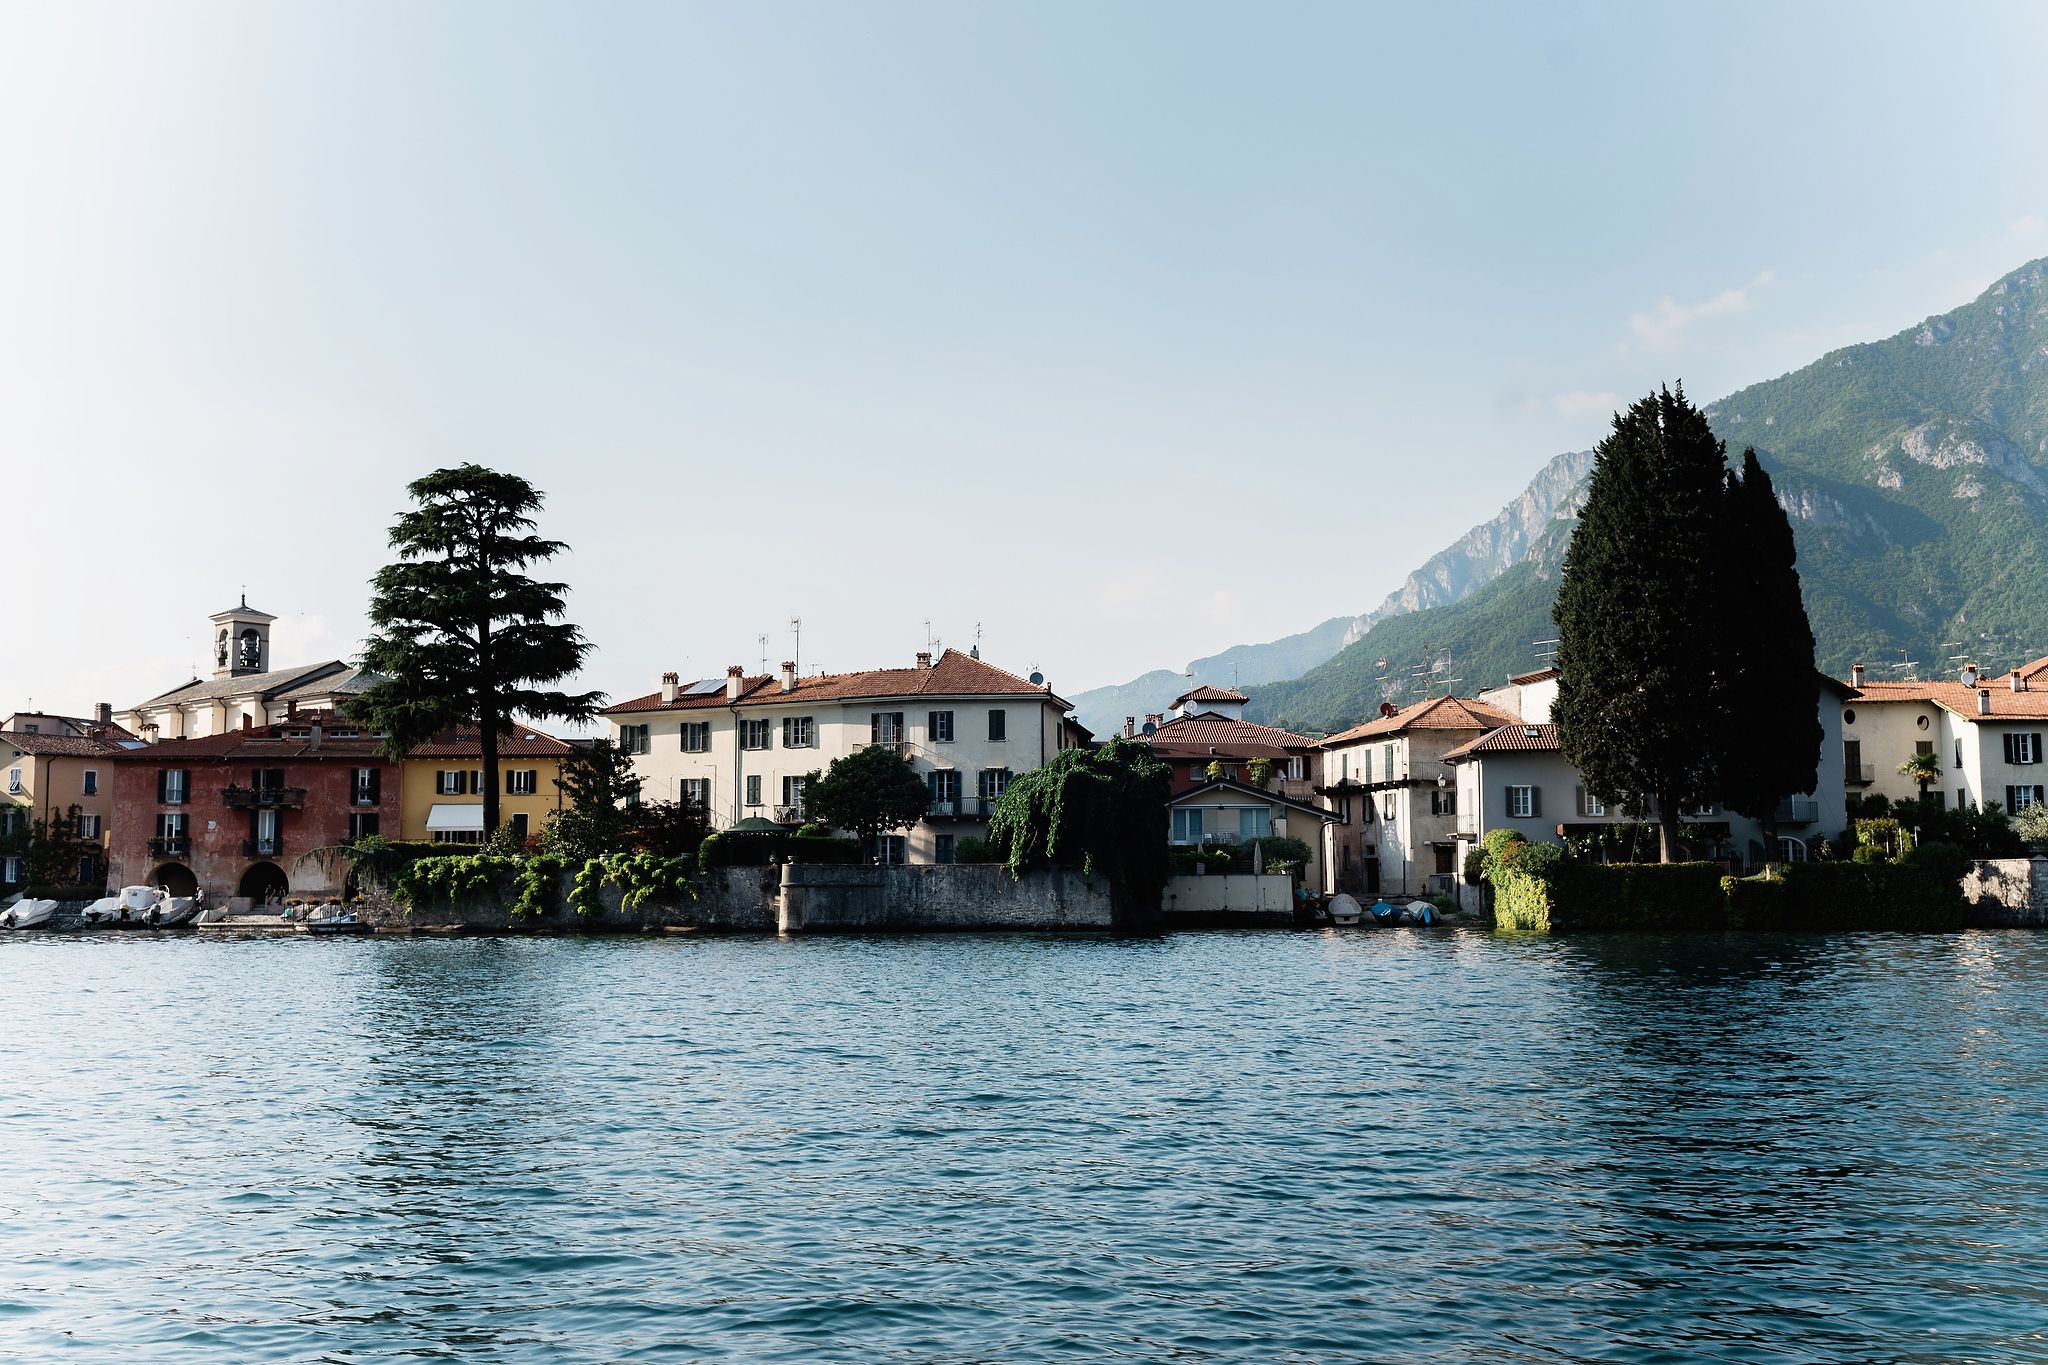 Lake Como with houses and trees in the background. Wedding in Italy image by Jenny Fu Studio